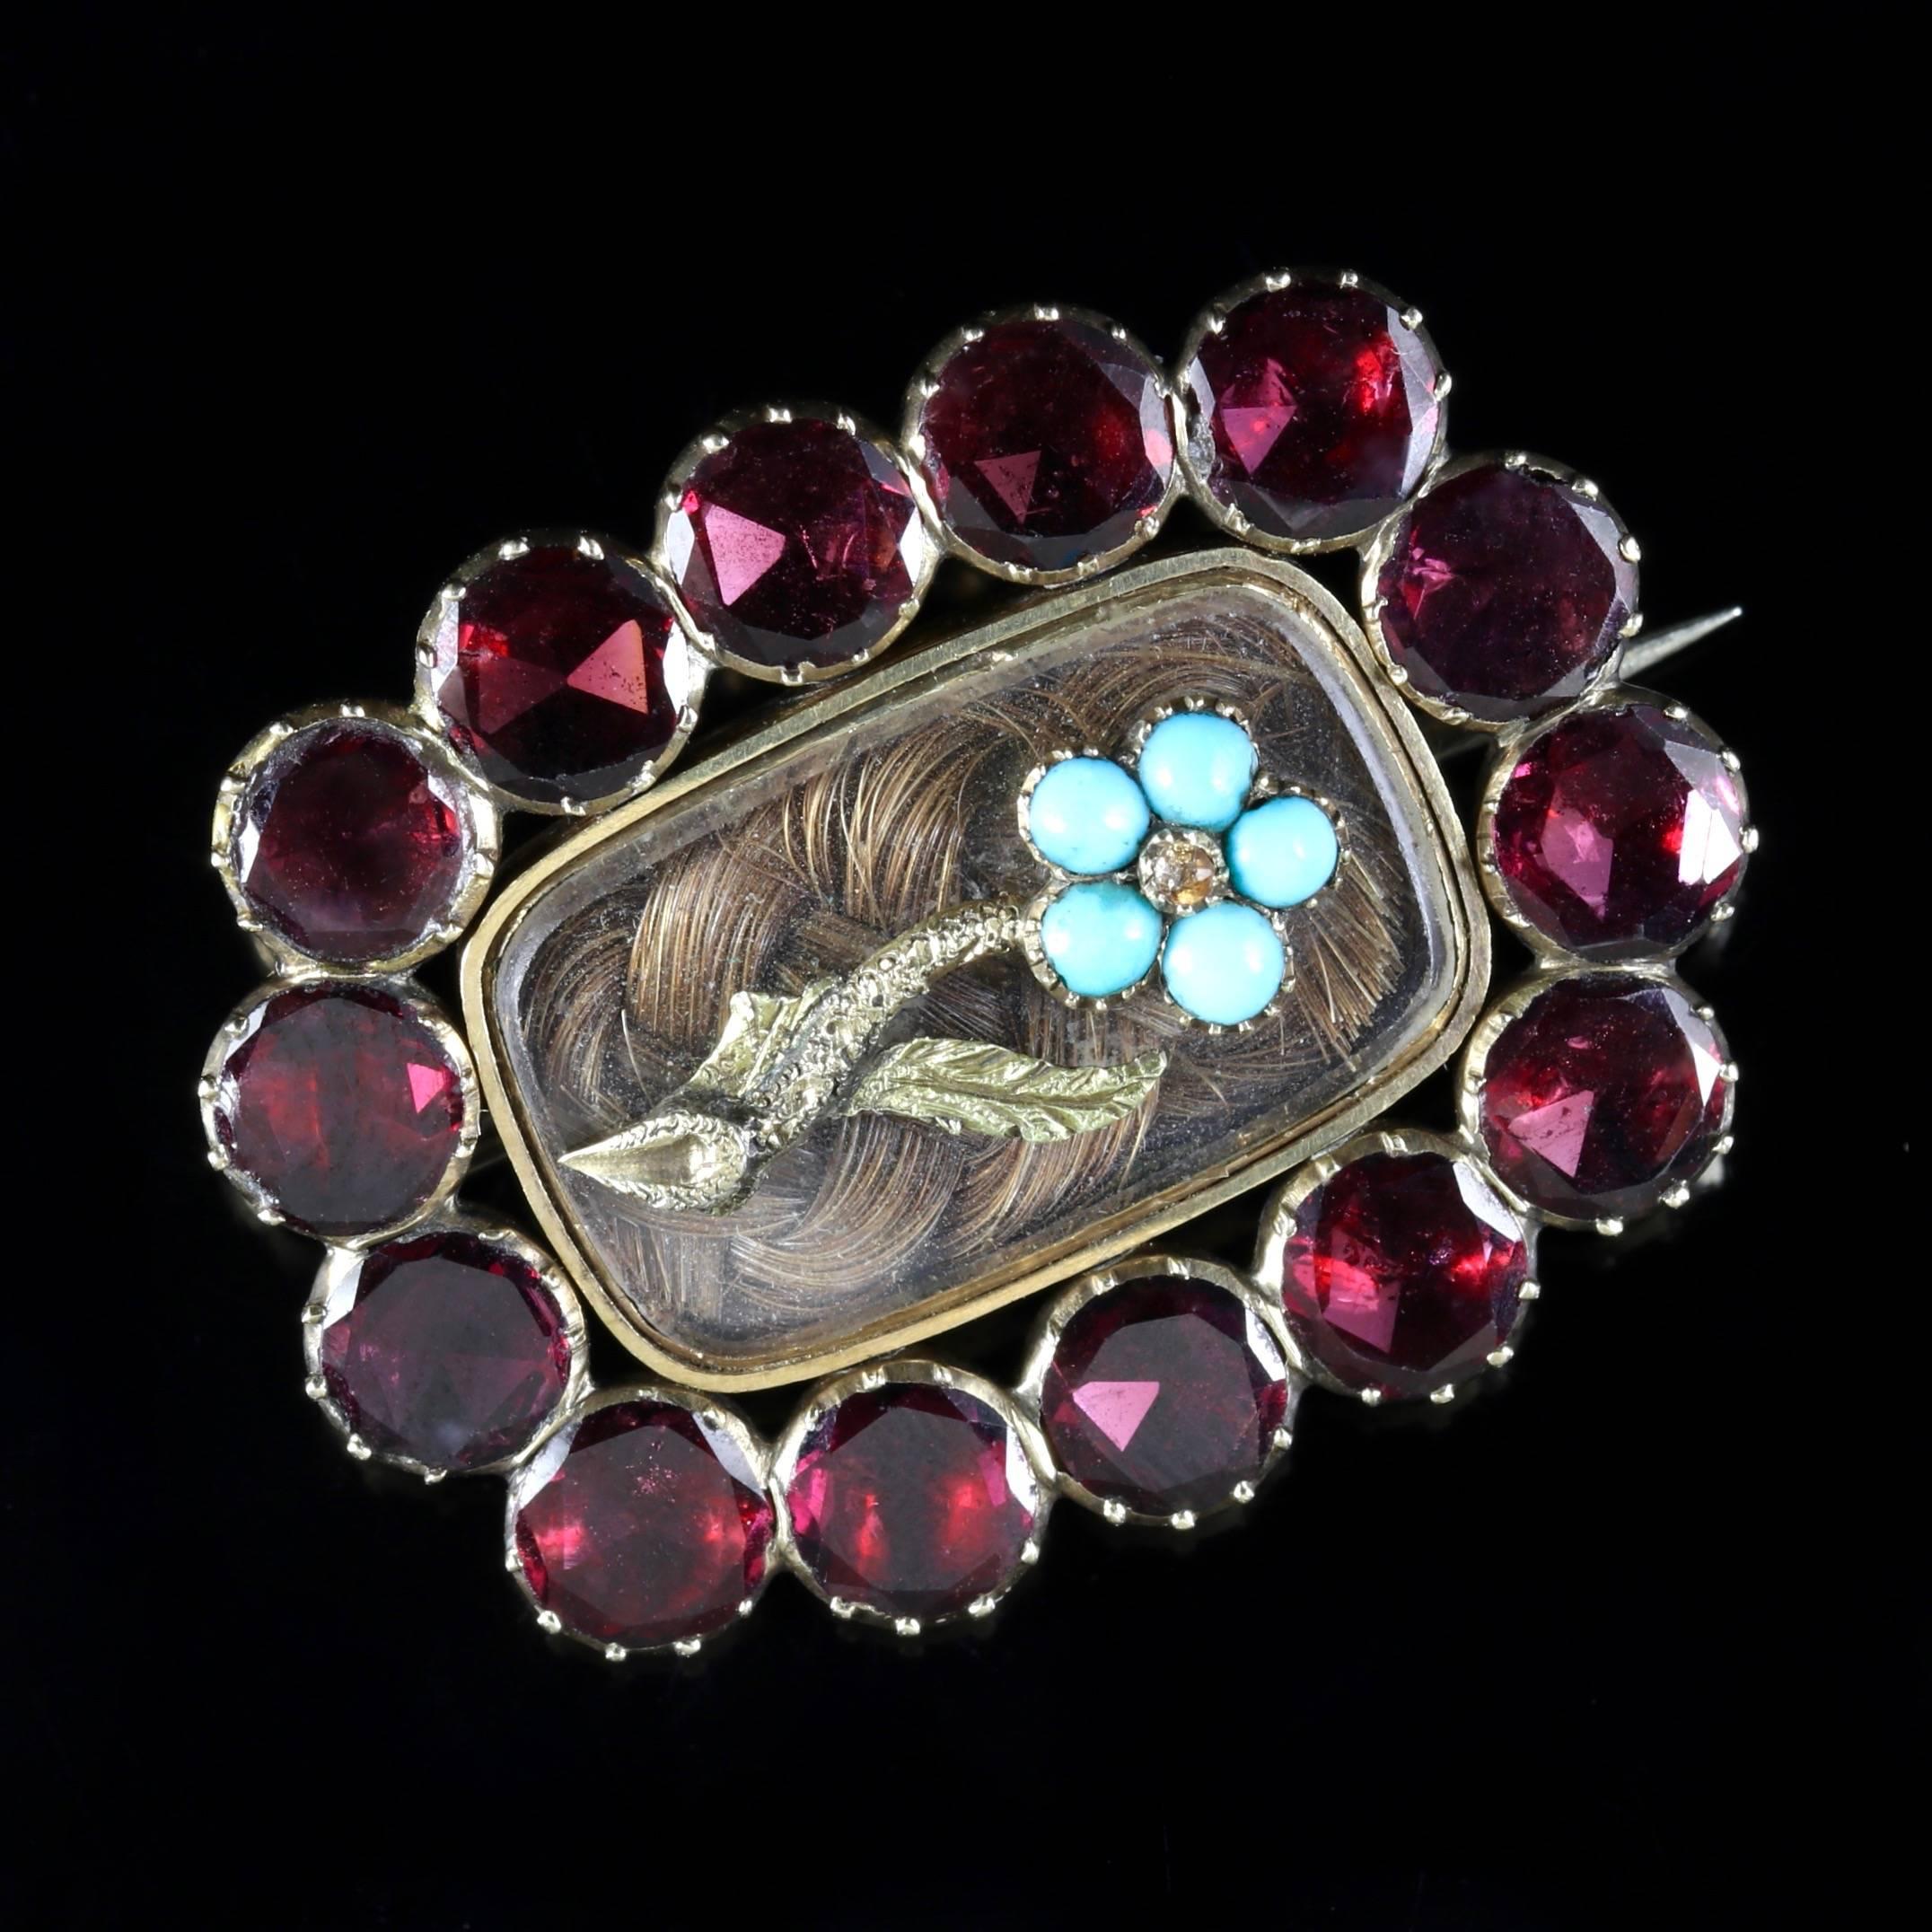 This antique Georgian Flat cut Garnet mourning 18ct Gold brooch is Circa 1790.

Due to its age, Georgian jewellery is quite rare, with some pieces almost three hundred years old. From 1714 until 1837 four King Georges and a short-lived William gave